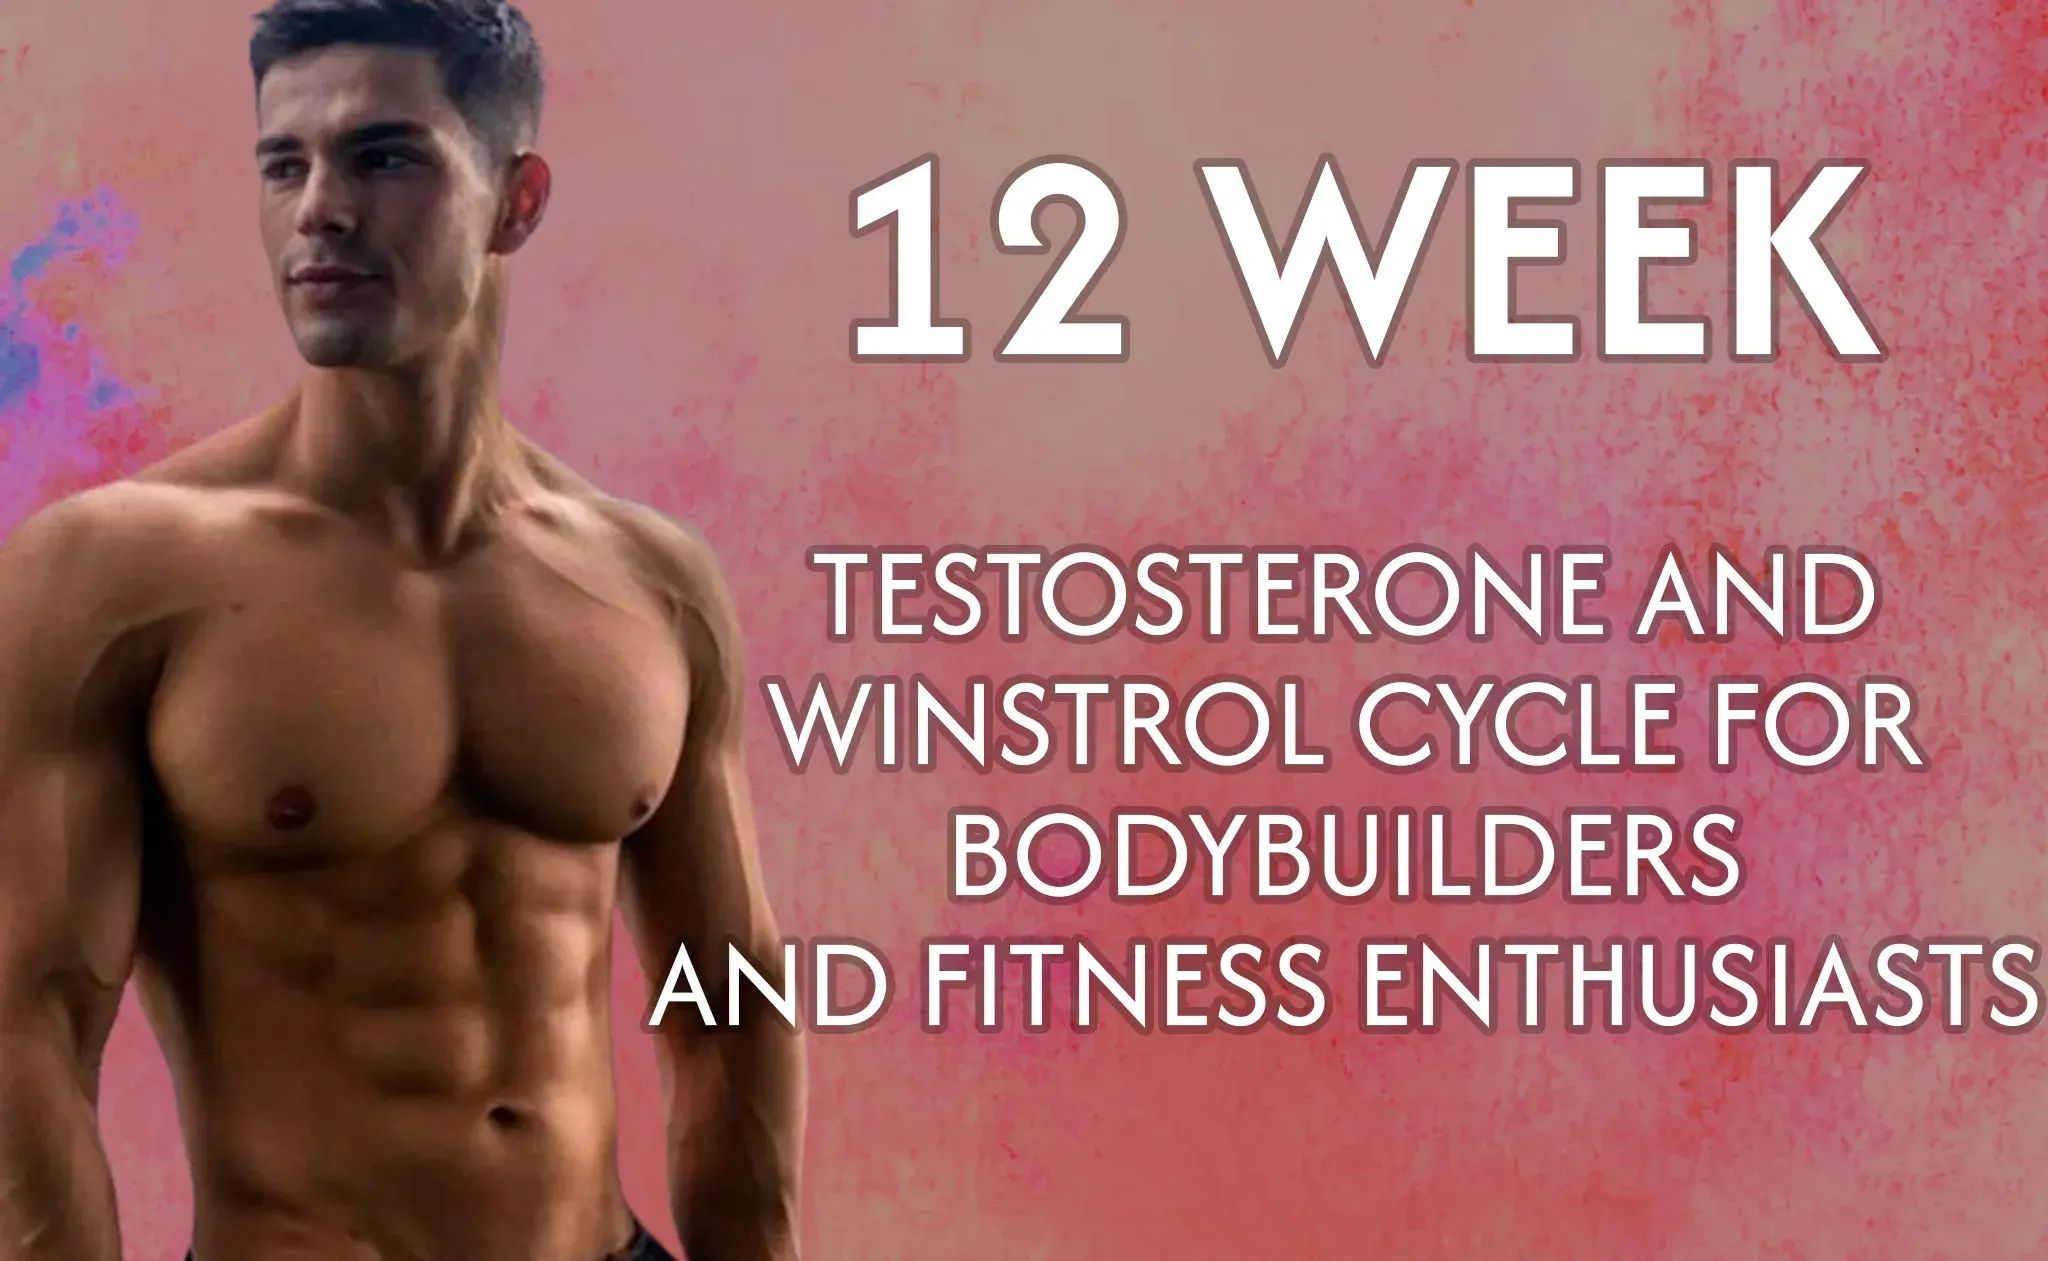 12 Week Testosterone and Winstrol Cycle for Bodybuilders and Fitness Enthusiasts